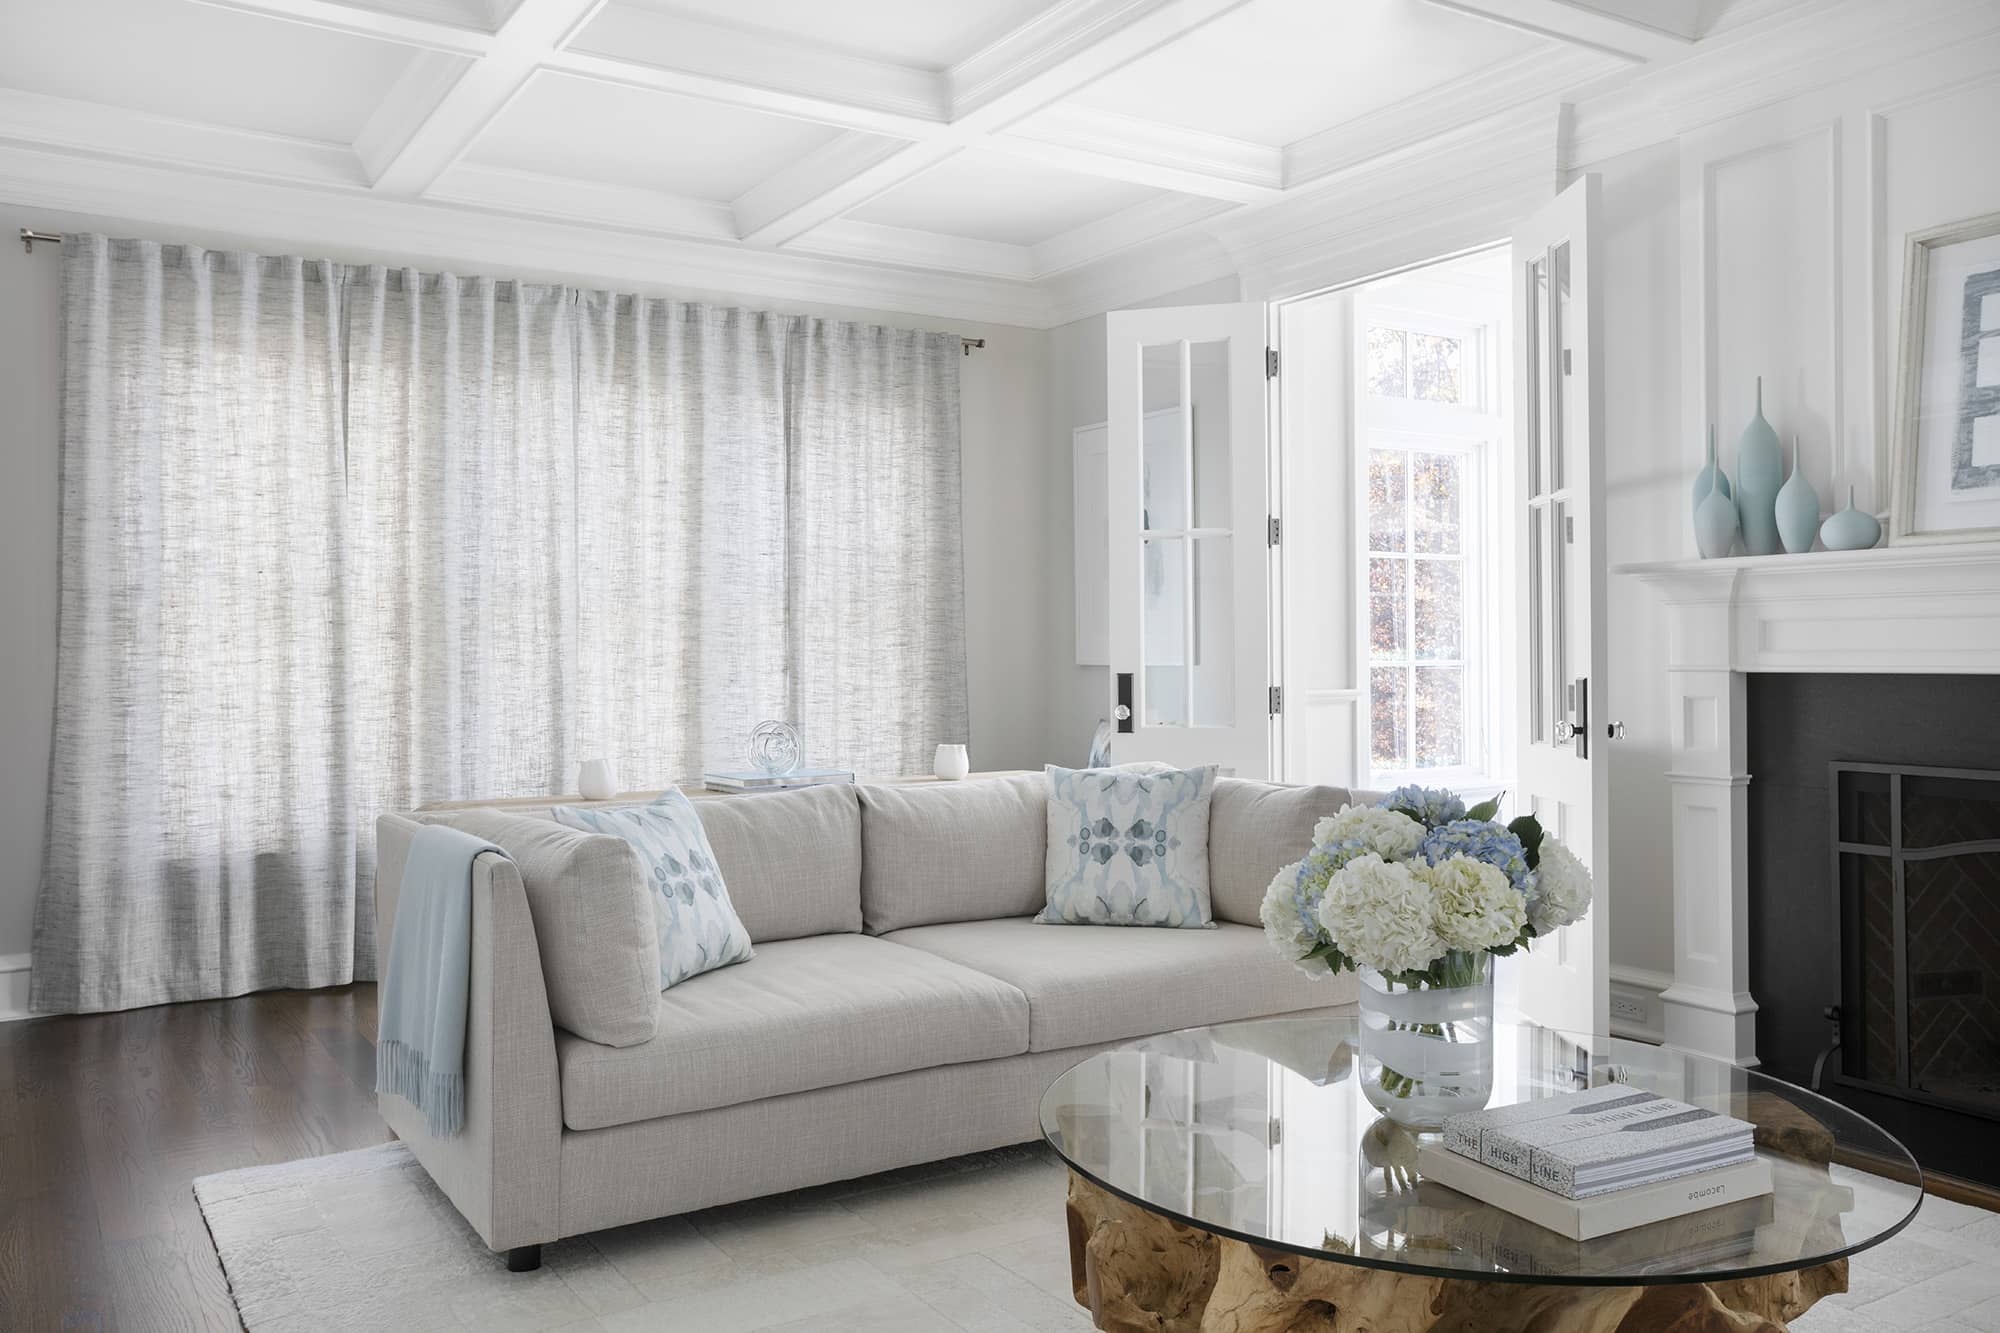 A living room with light grey textured sheer drapes